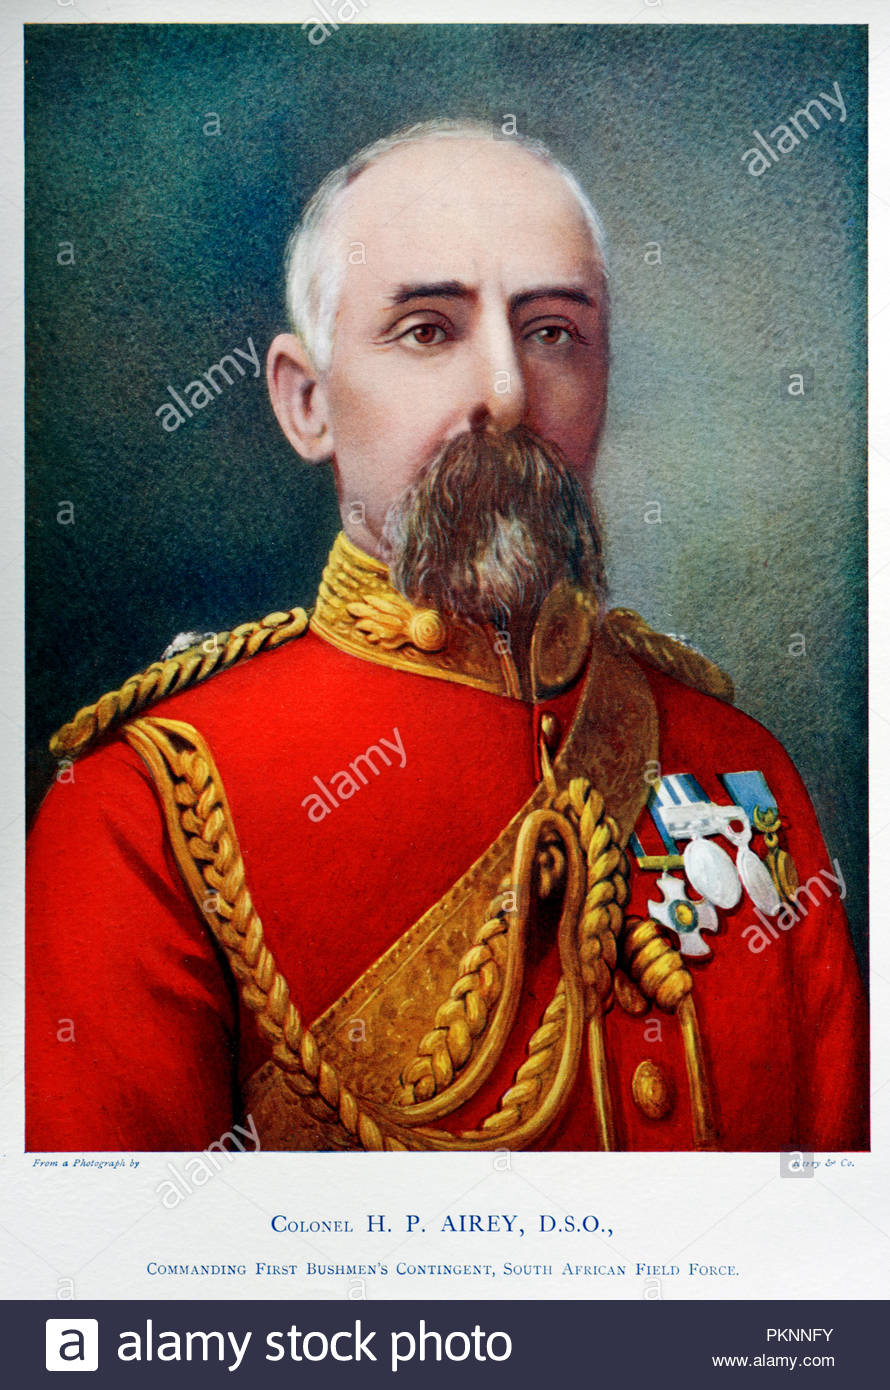 Colonel Henry Parke Airey CMG, DSO, 1842 – 1911, was an Australian colonial soldier. Colour illustration from 1900 Stock Photo